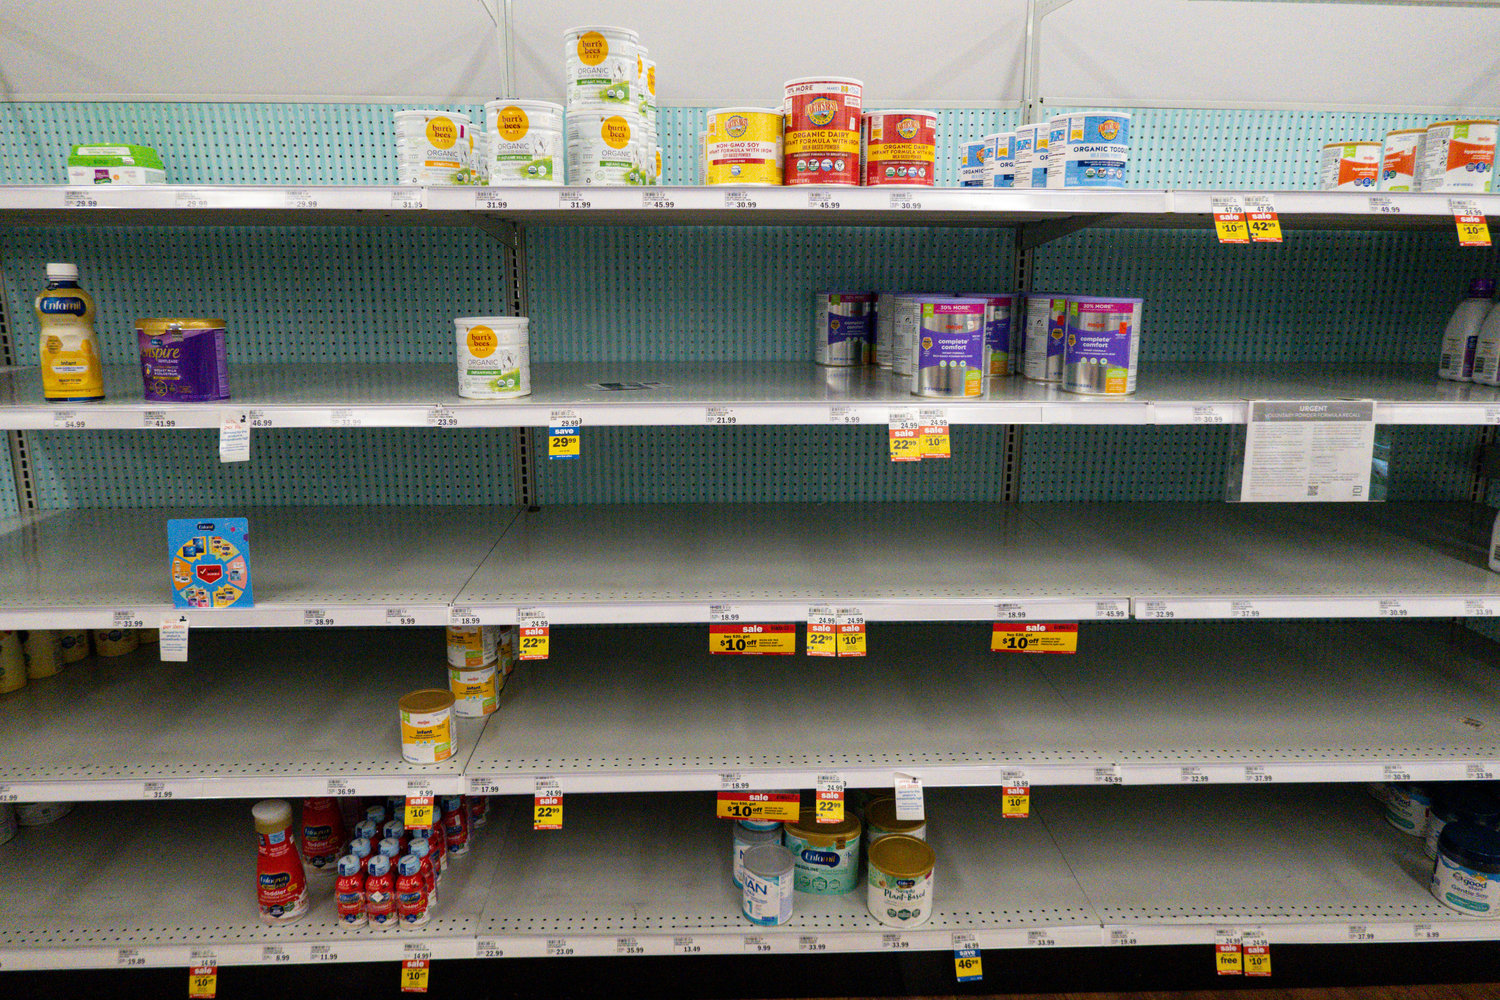 Baby formula is displayed on the shelves of a grocery store in Carmel, Ind., Tuesday, May 10, 2022. Parents across the U.S. are scrambling to find baby formula because supply disruptions and a massive safety recall have swept many leading brands off store shelves. (AP Photo/Michael Conroy)